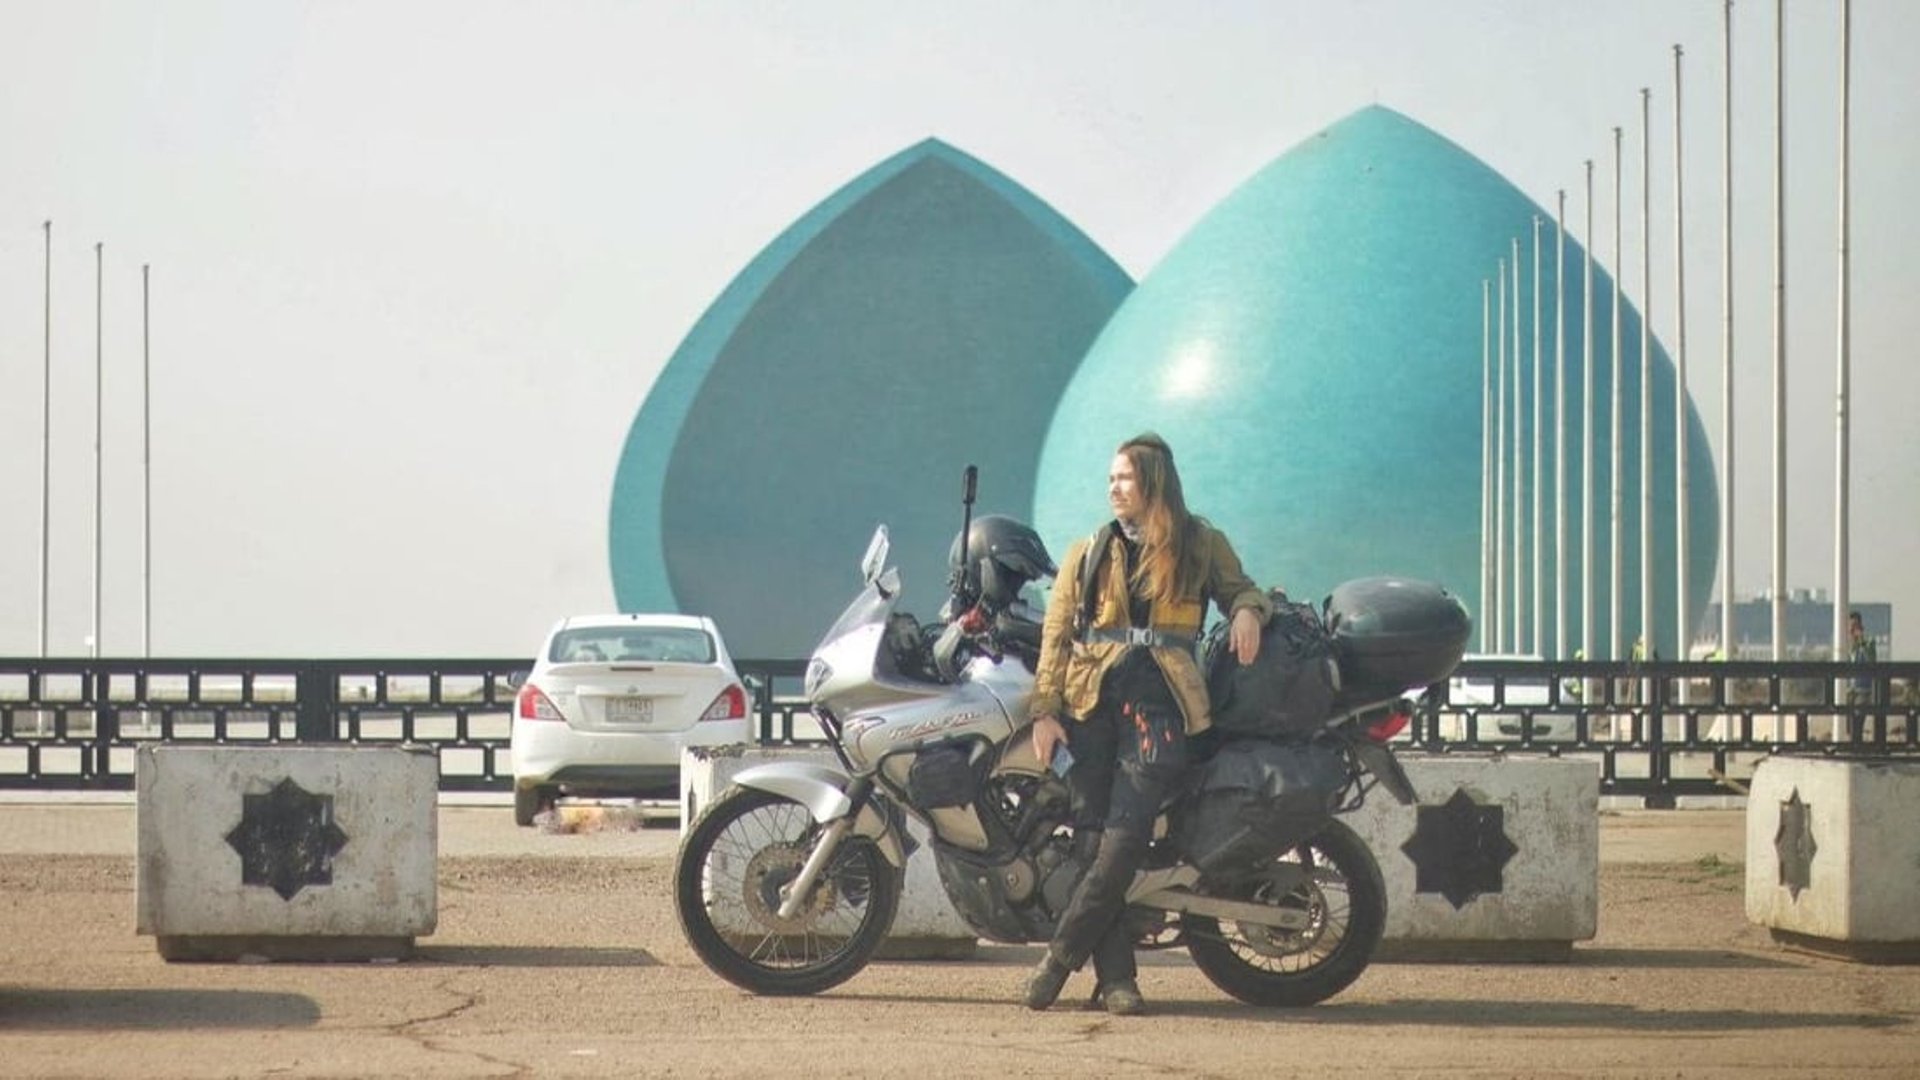 A Swedish Motorcycles Diary in Iraq Not Iran